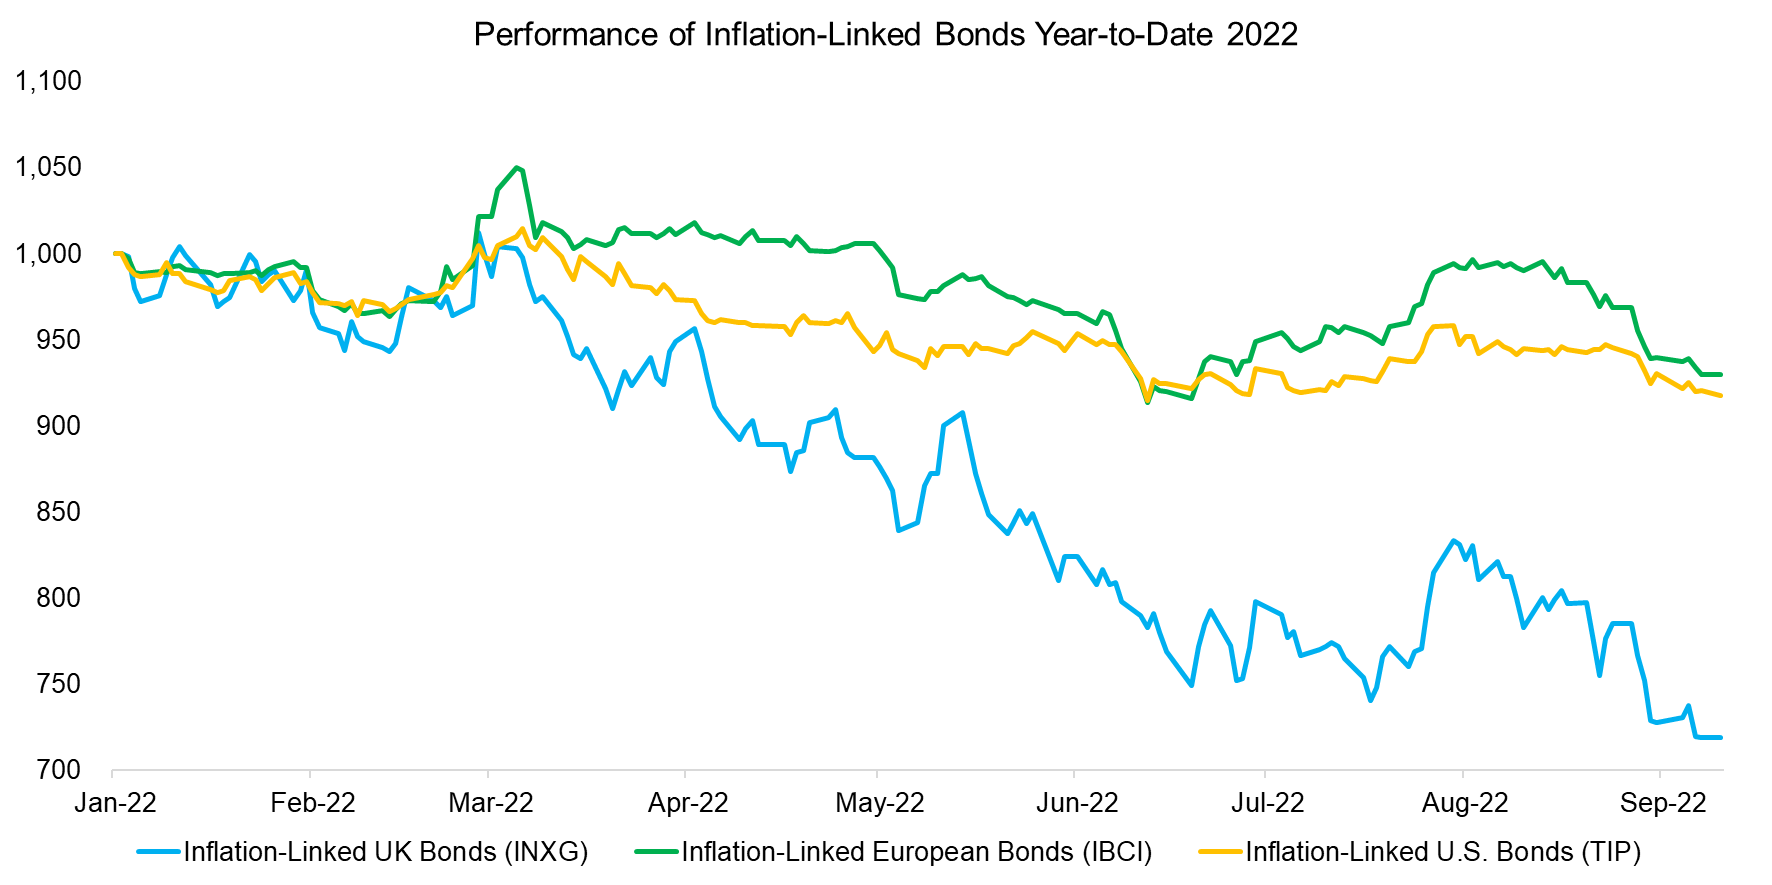 Performance of Inflation-Linked Bonds Year-to-Date 2022